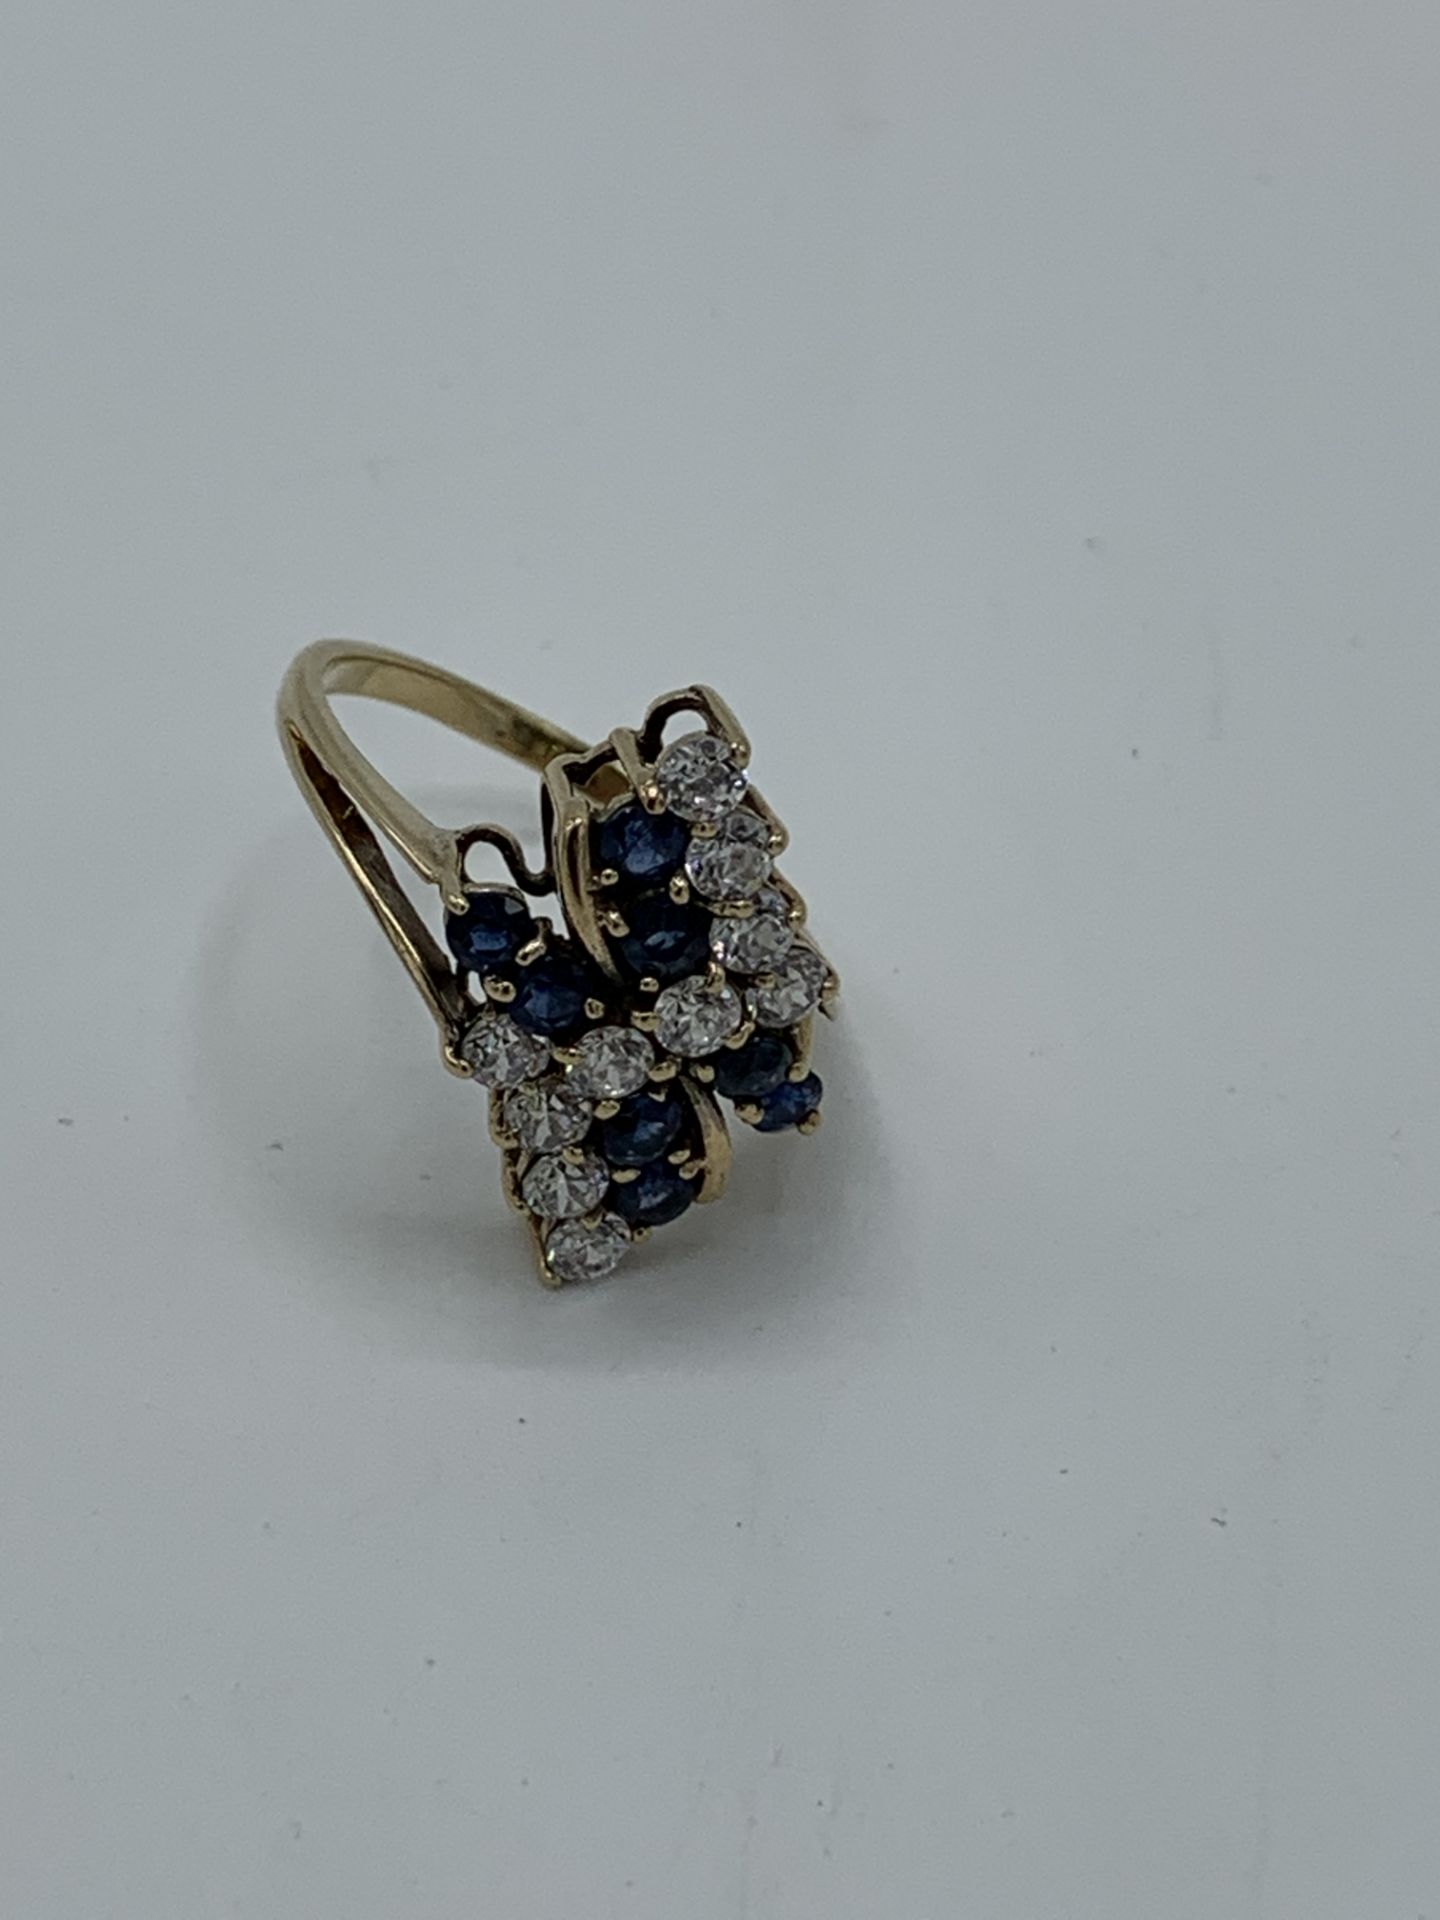 9ct gold ring set with blue and white stones, size P, weight 3.6gms. Estimate £150-180. - Image 2 of 3